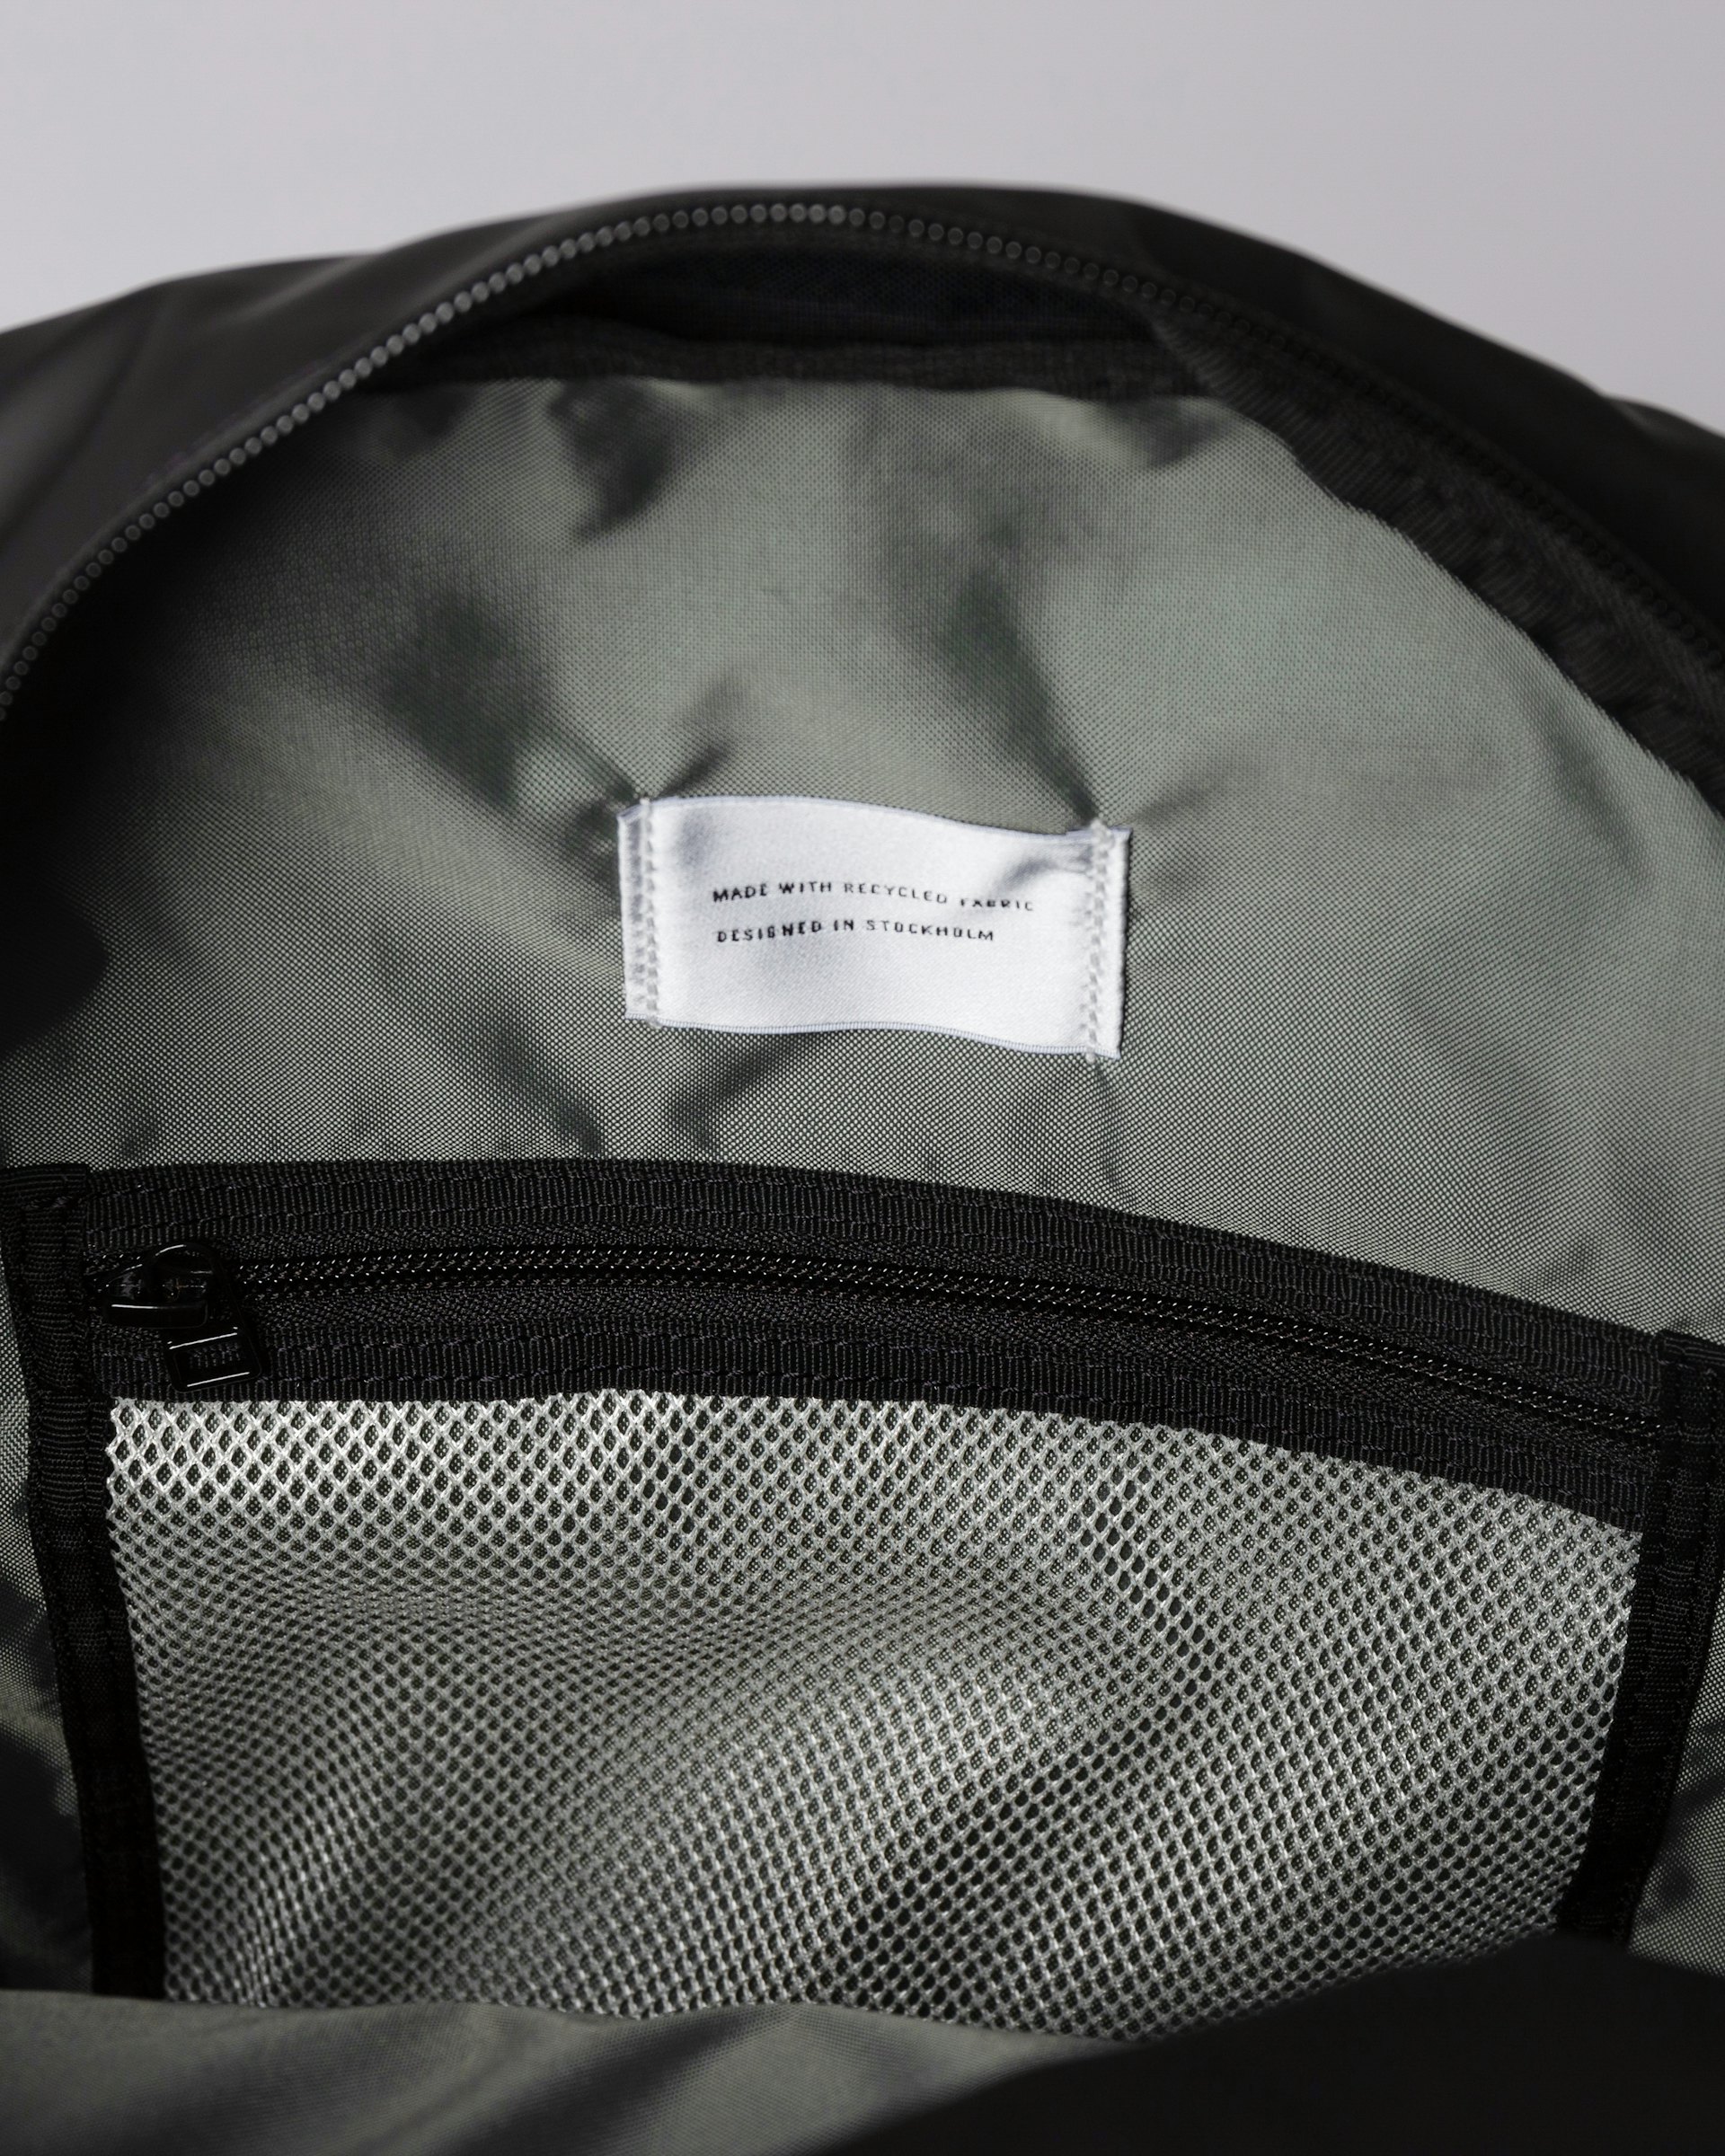 Alvar belongs to the category Backpacks and is in color black (6 of 6)